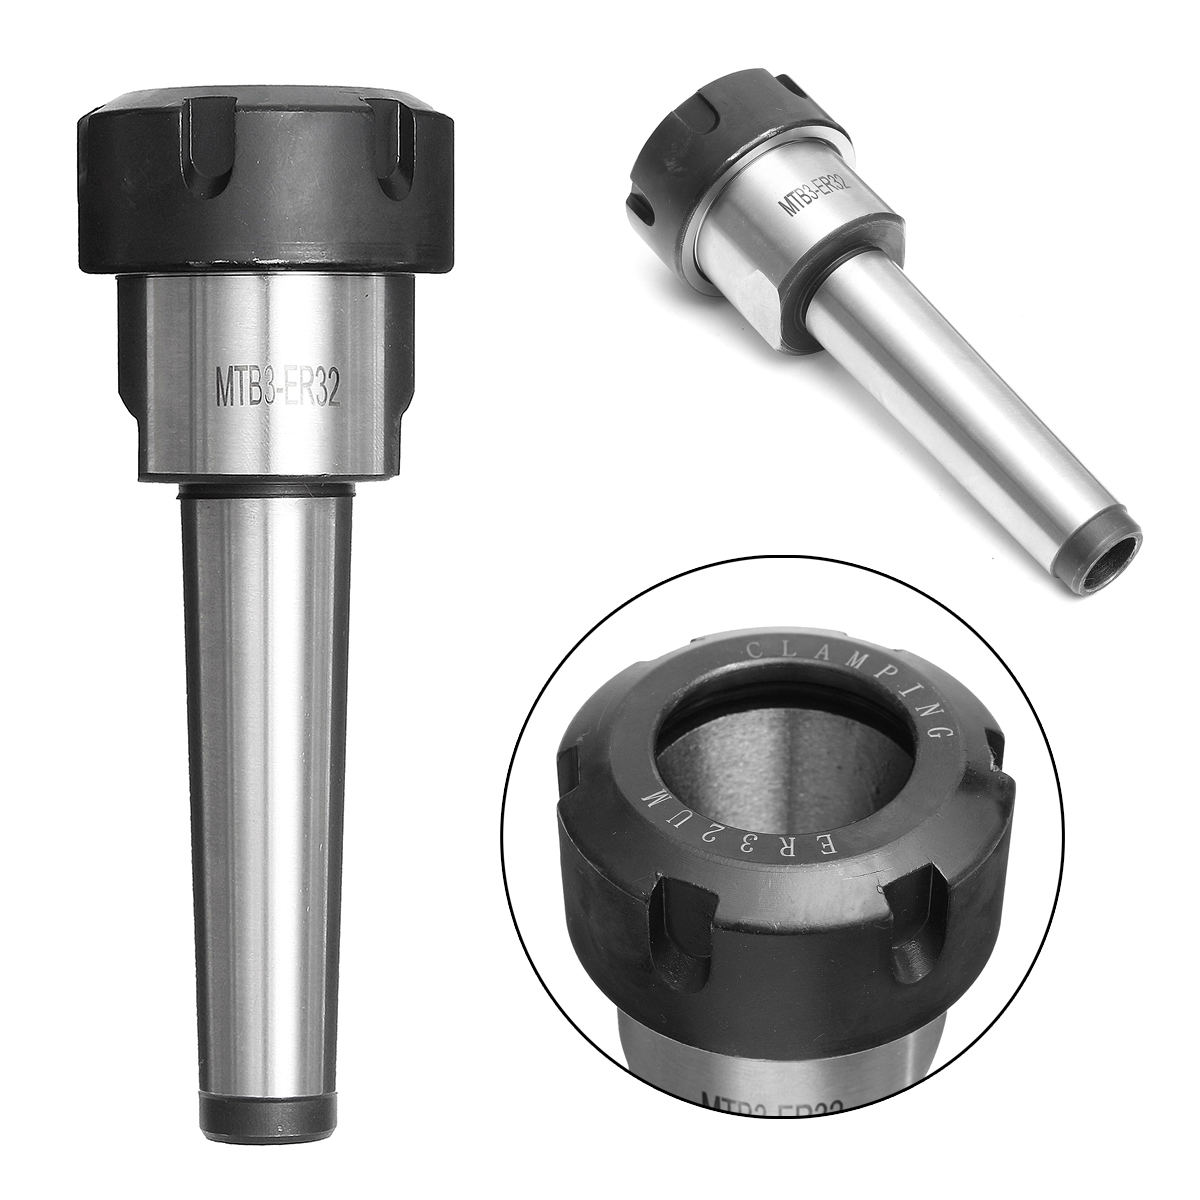 18pcs-3-20mm-Collects-Set-MTB3-ER32-Collet-Chuck-Set--12-Inch-Thread-with-Chuck-And-Spanner-1162136-7